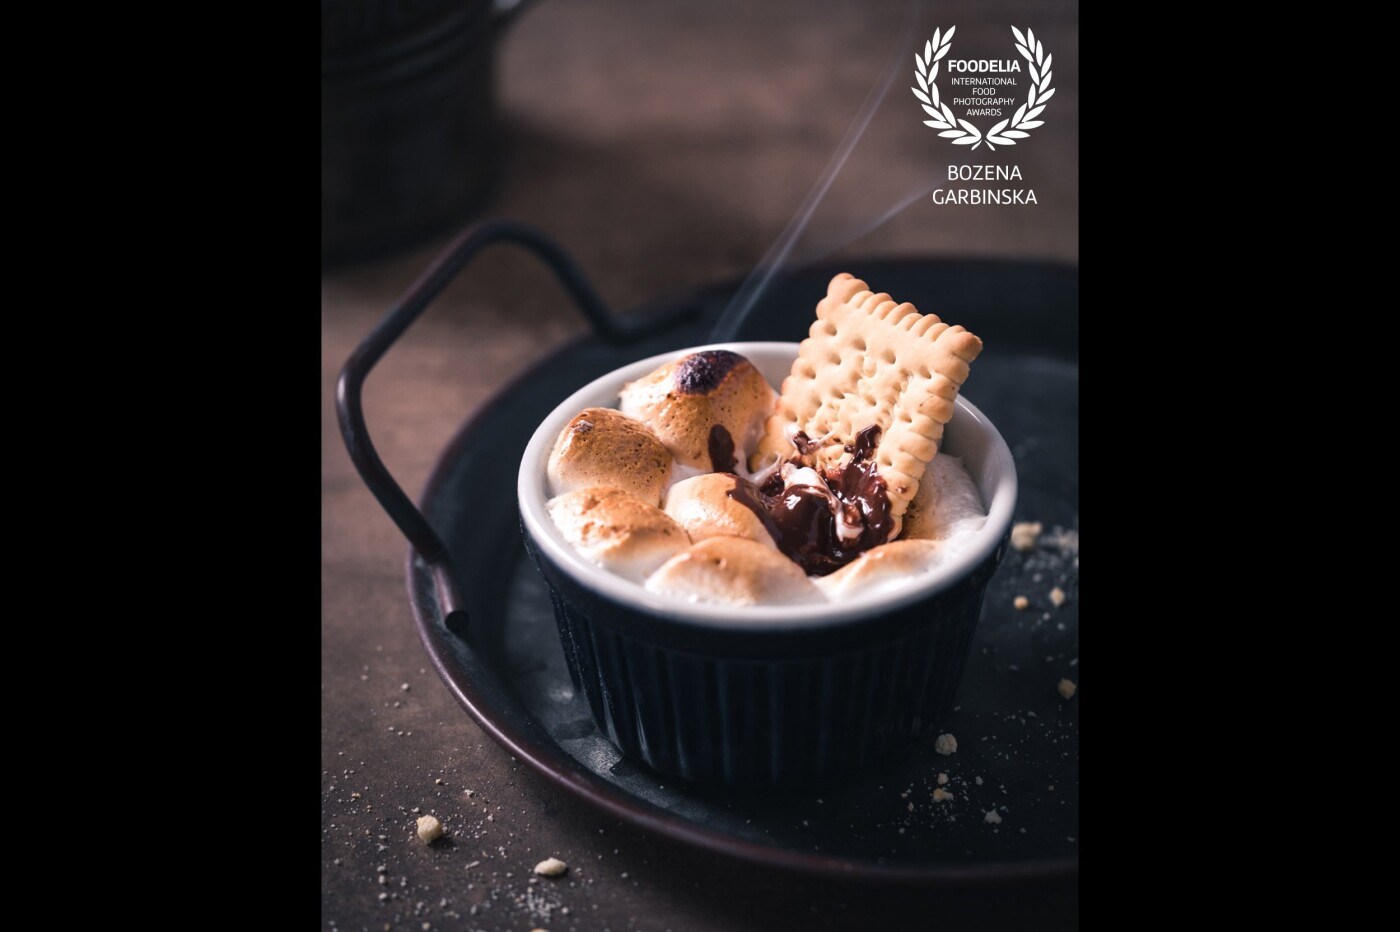 Hot chocolate with marshmallows and cookies. It's delicious<br />
Camera: Fuji X-T3<br />
Lens: Fujinon 80 mm<br />
Shot using artificial light.